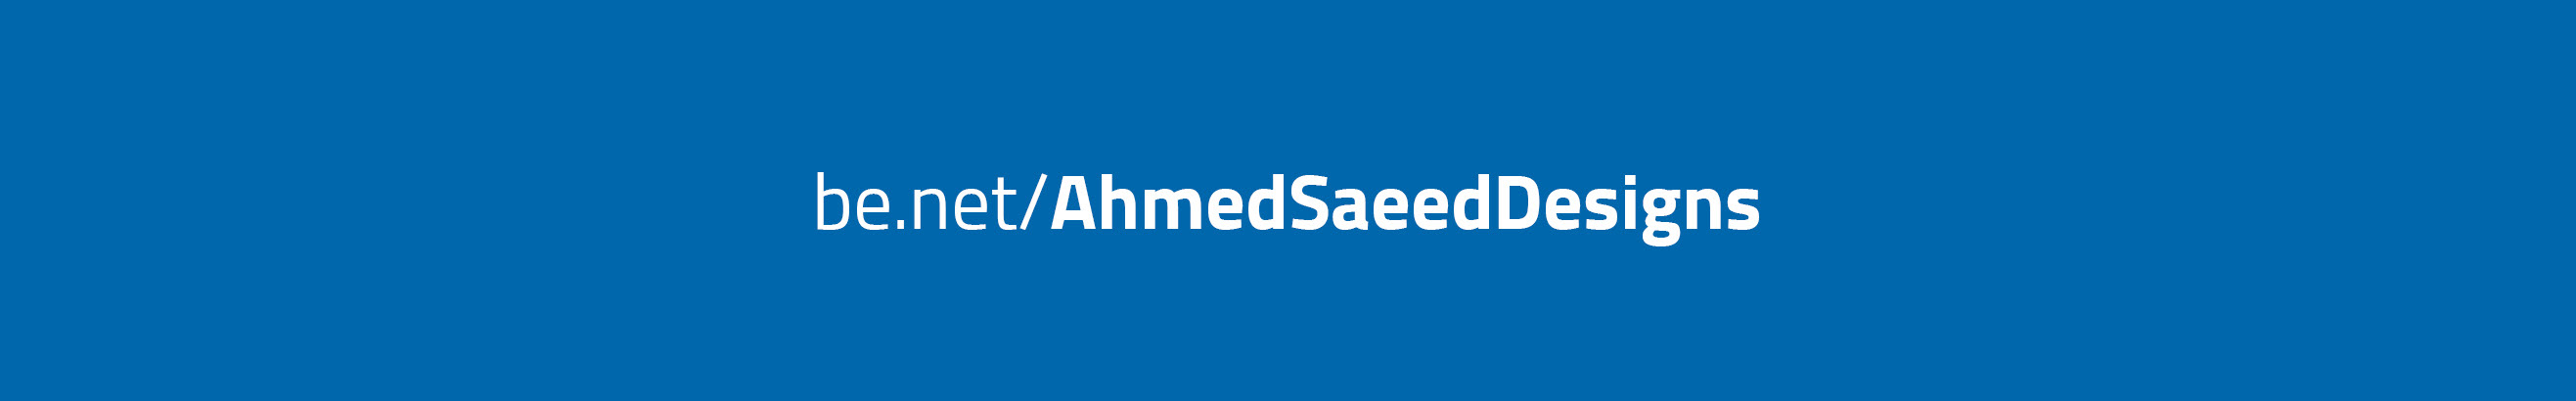 Ahmed Saeeds profilbanner